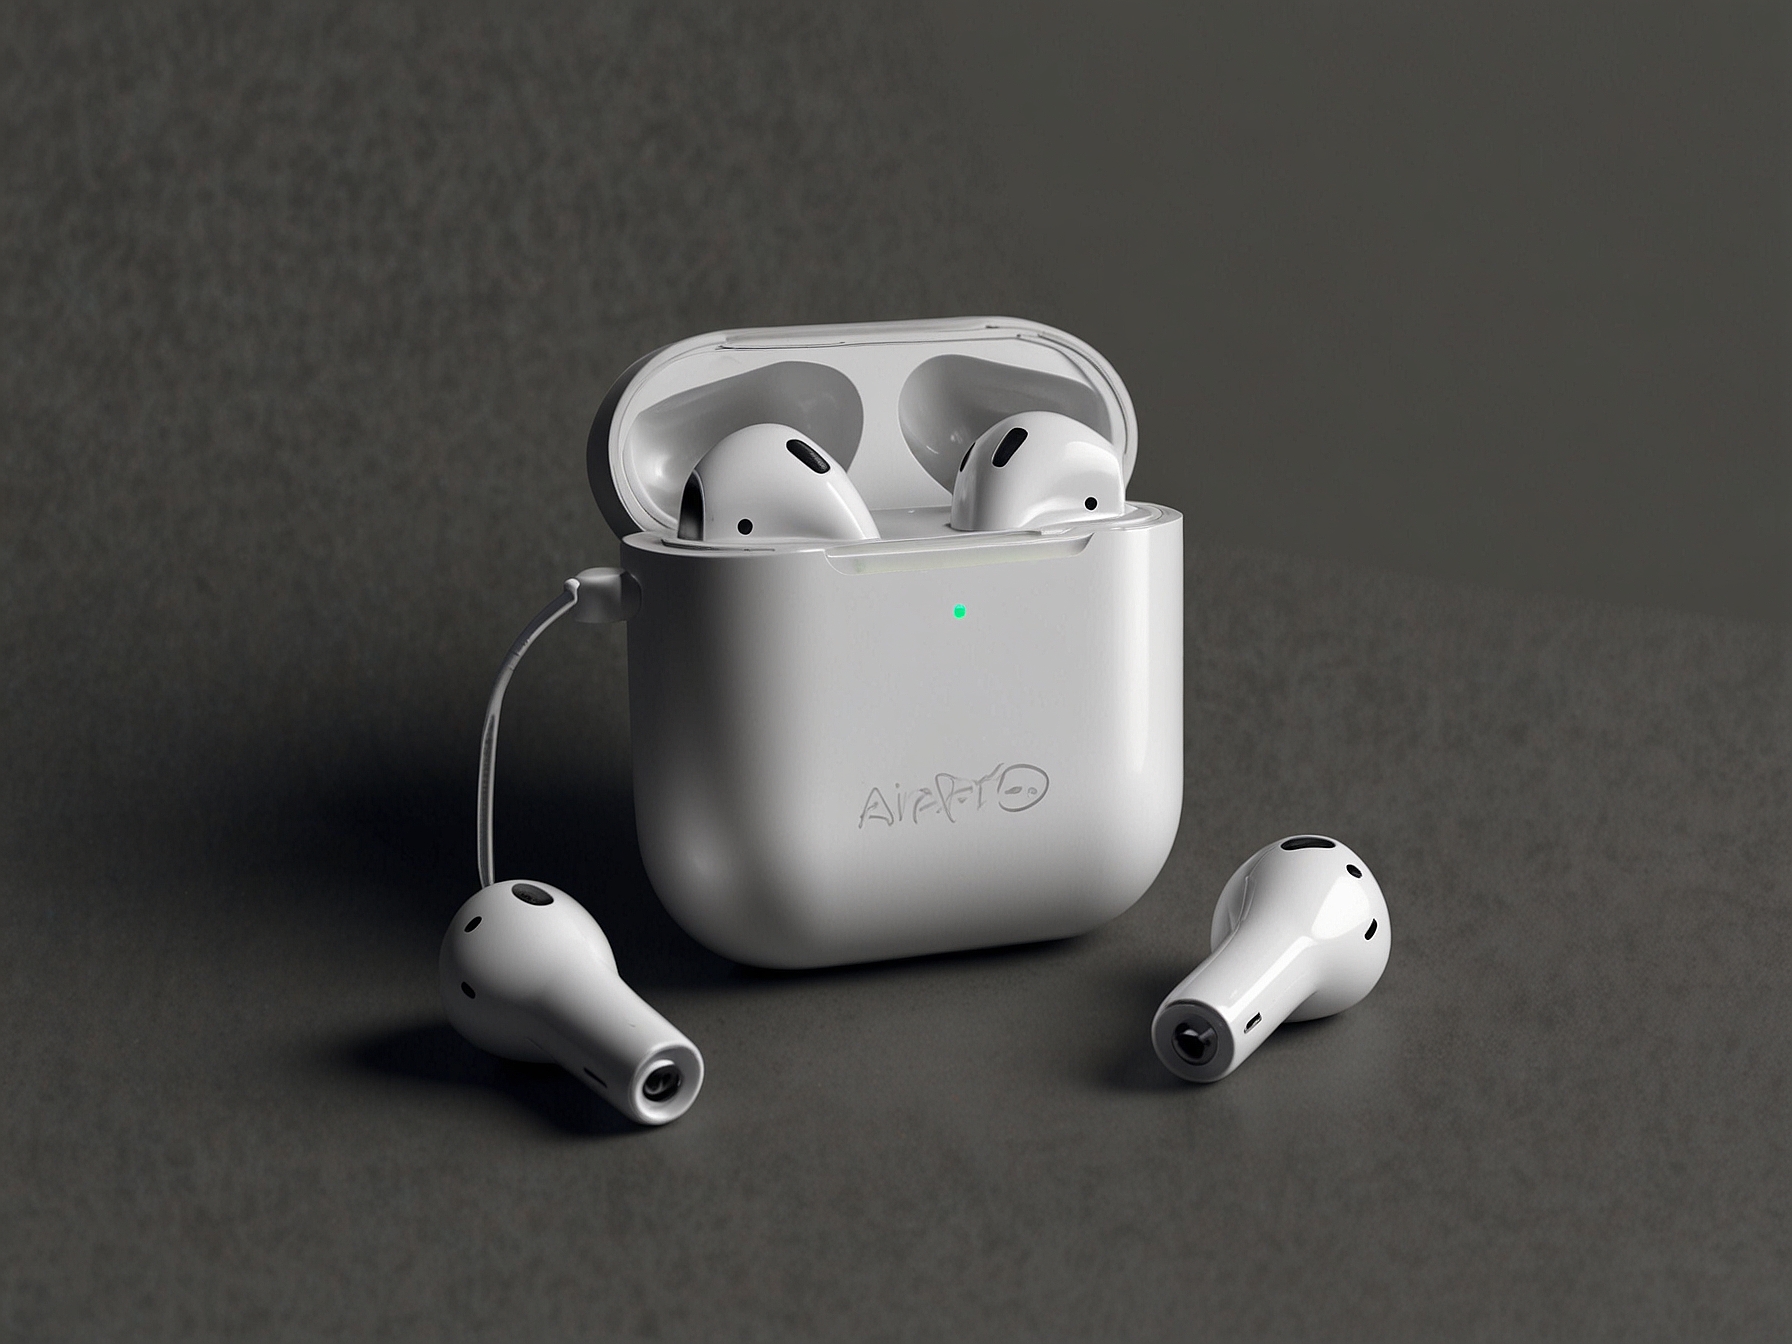 A pair of Apple AirPods in their charging case, emphasizing features like their ergonomic fit and minimalistic design. The background showcases various Apple devices to illustrate seamless integration.